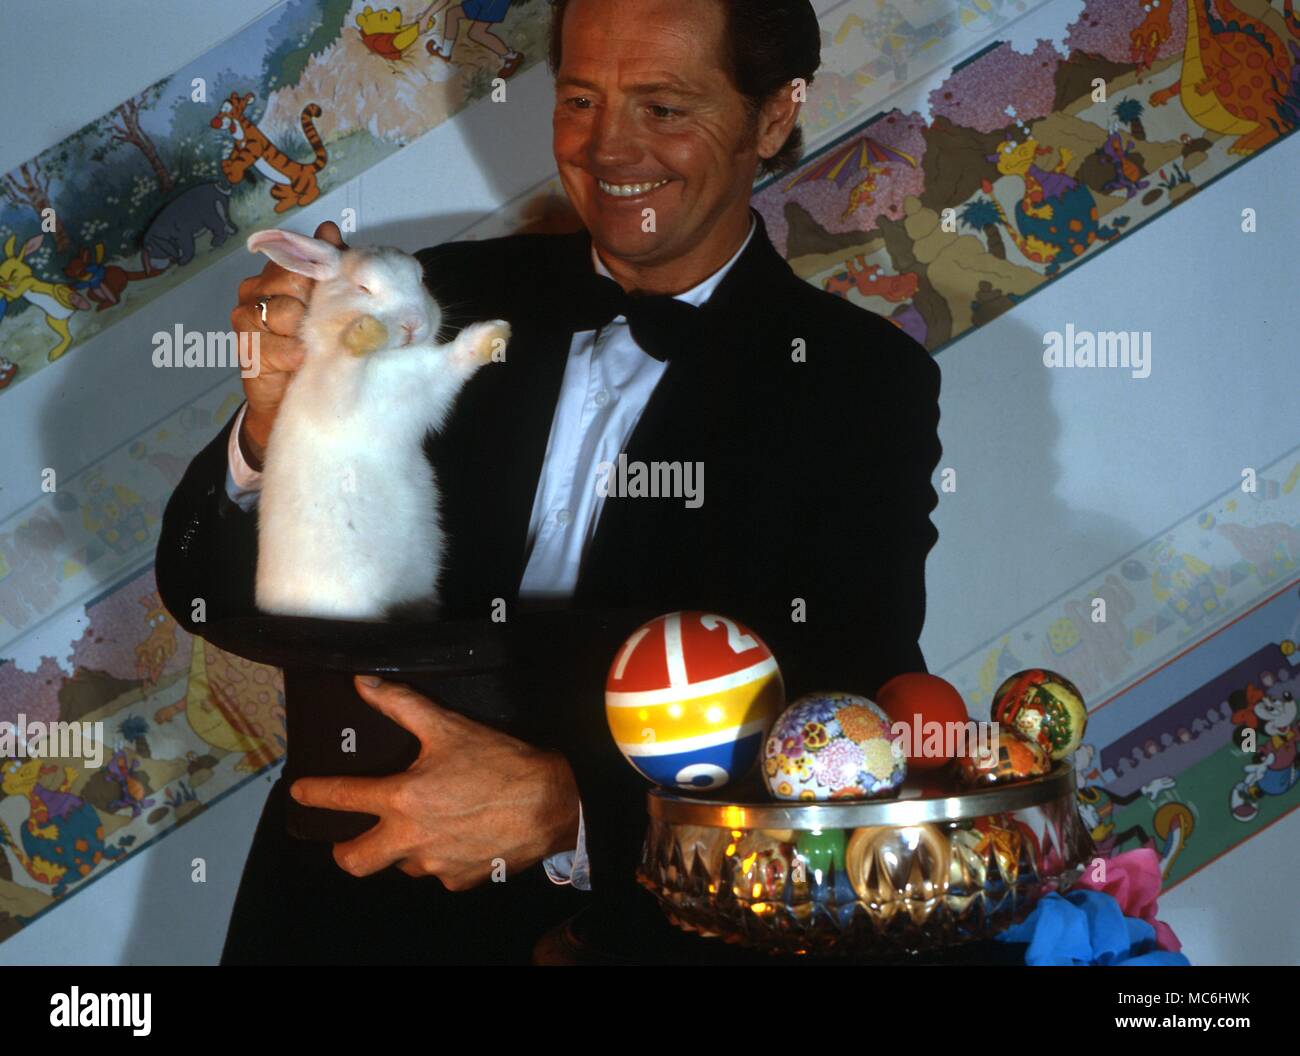 The magician lifts a white rabbit from a top hat which has just been shown to be empty. Stock Photo